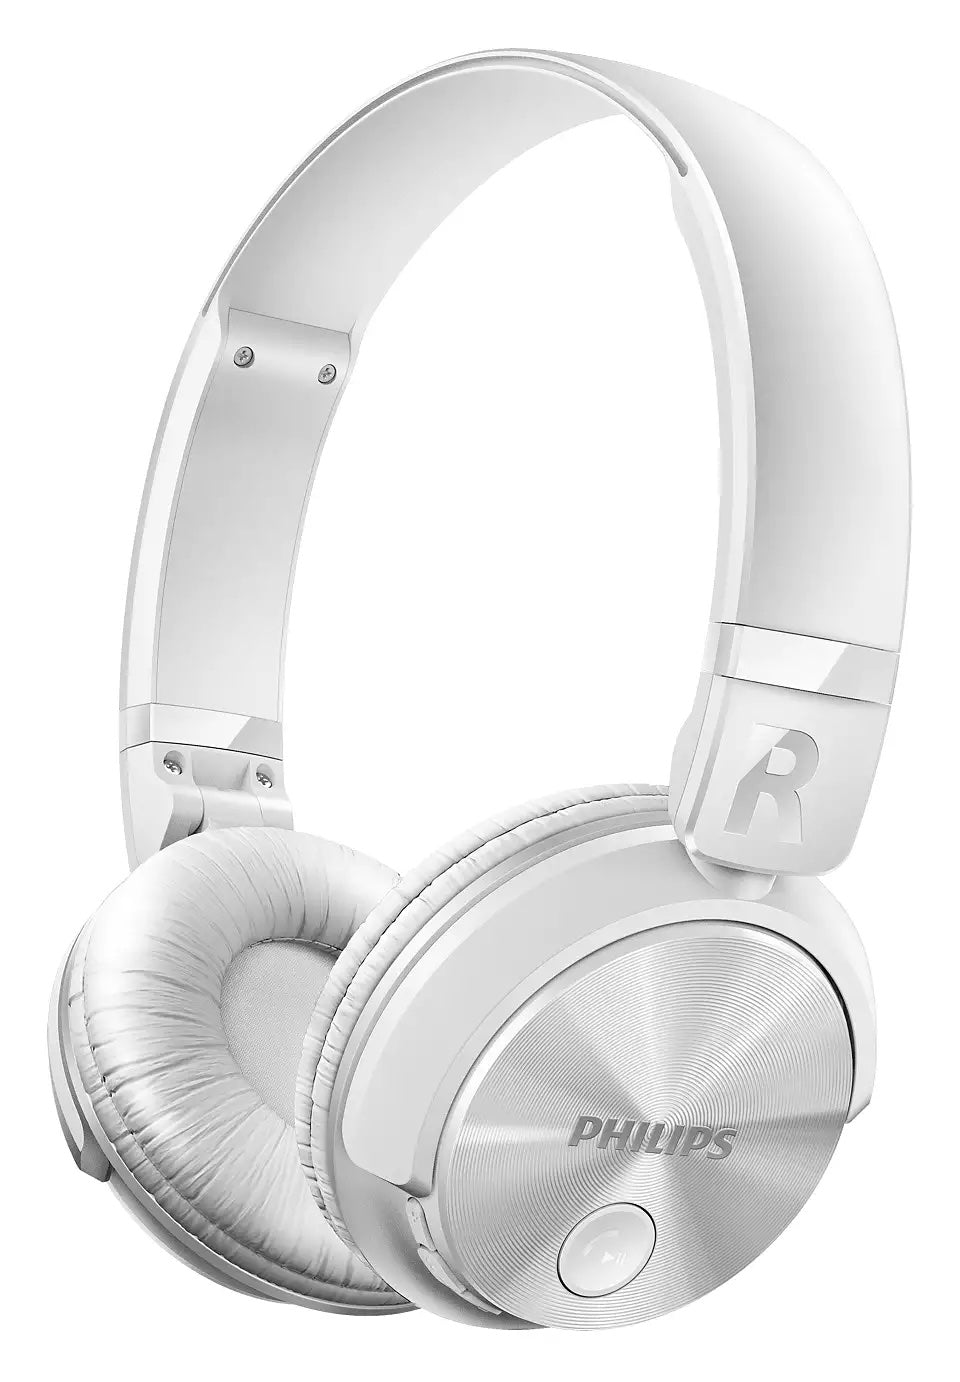 philips-bluetooth-stereo-wireless-over-ear-headset-white-1